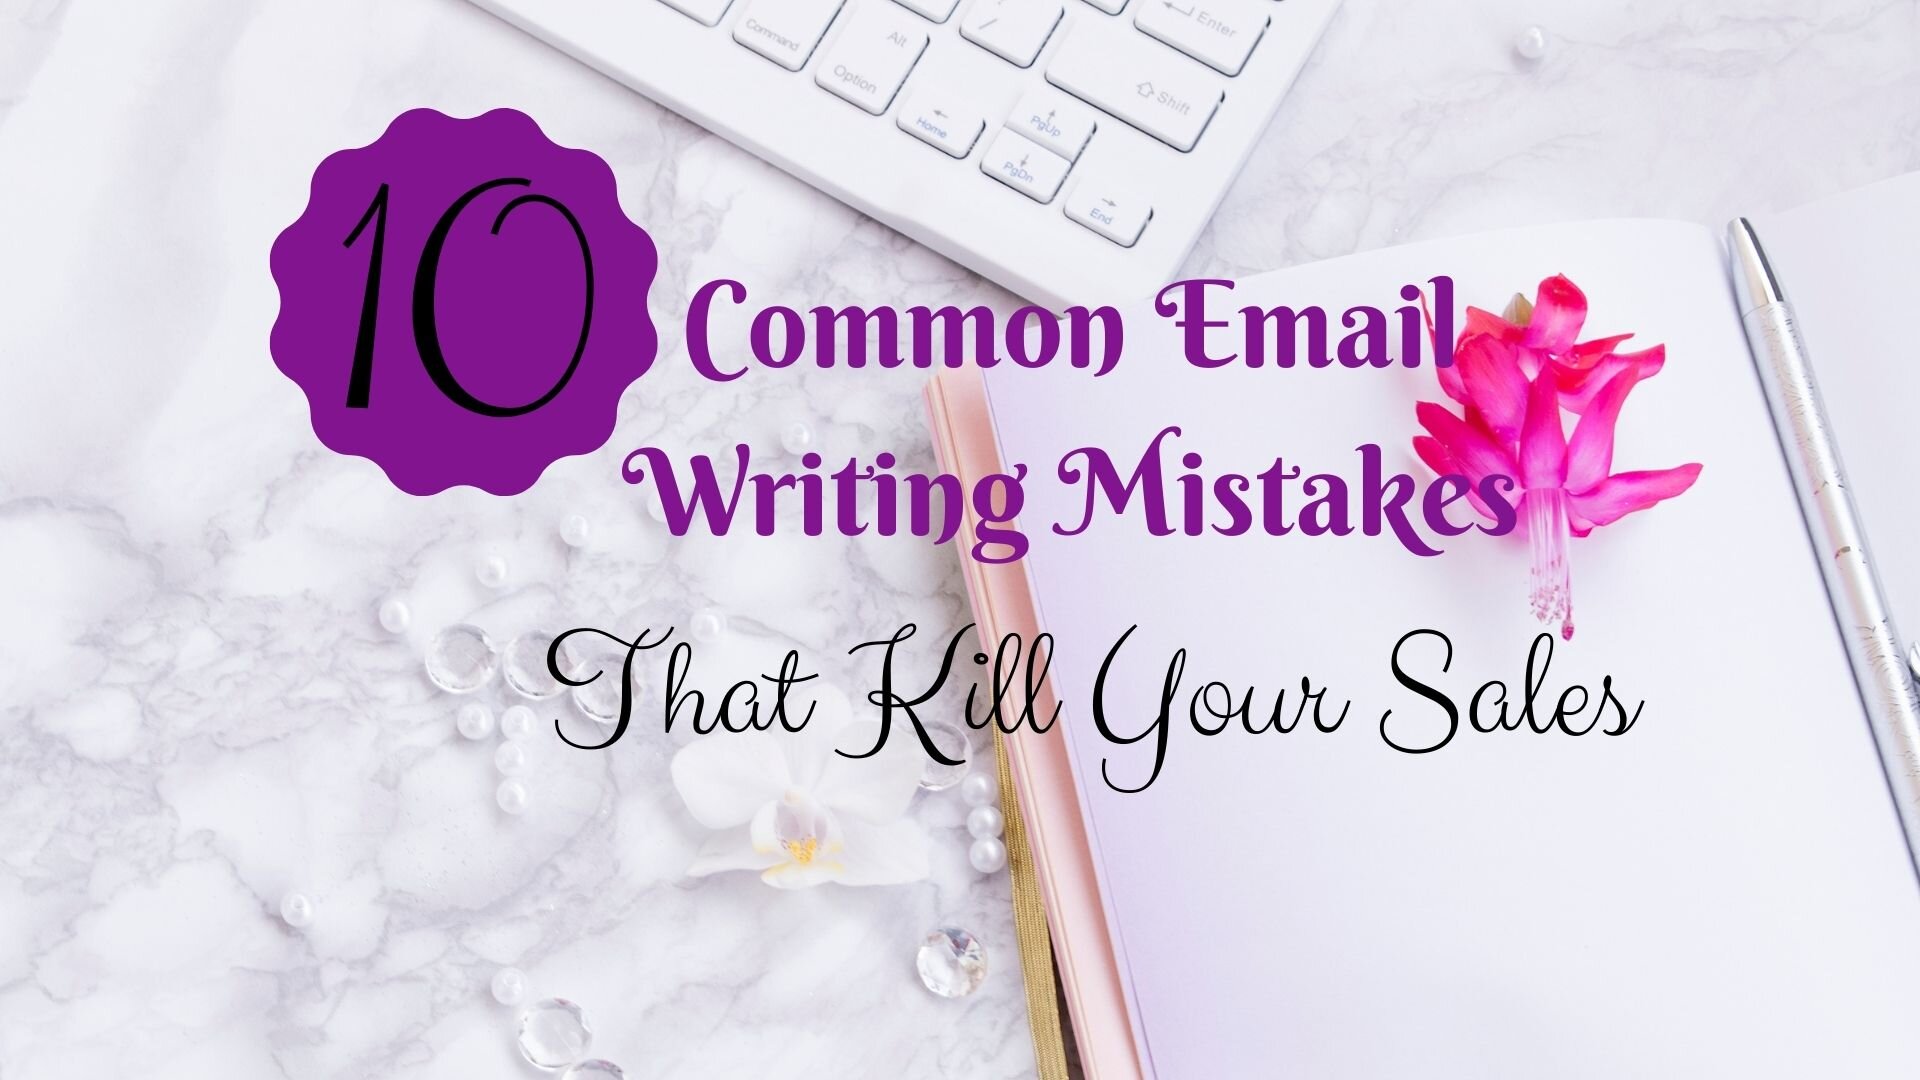 10 Common Email Writing Mistakes That Kill Your Sales